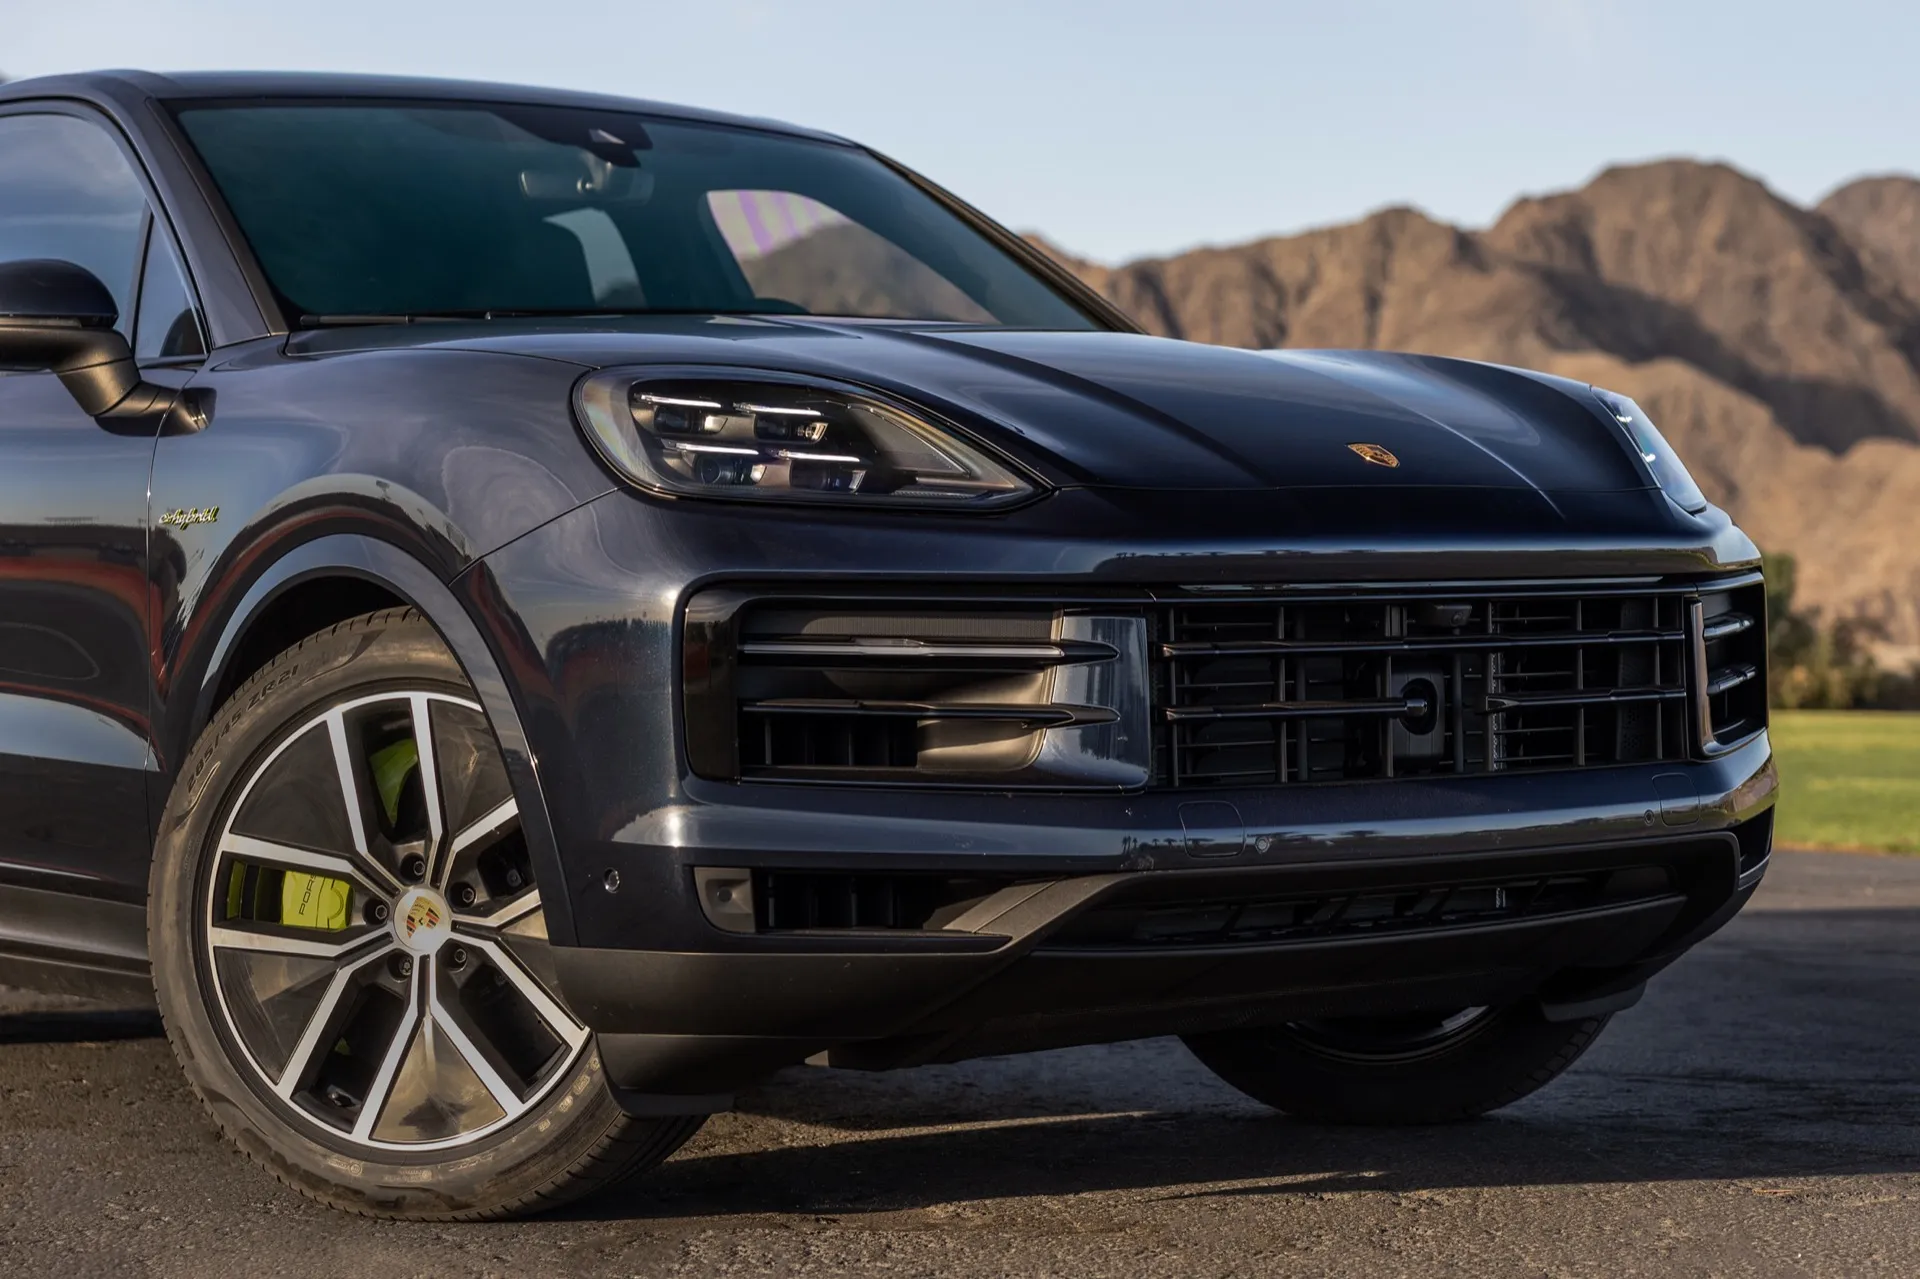 Electrified Porsche Cayenne with over 690 hp reportedly within the works